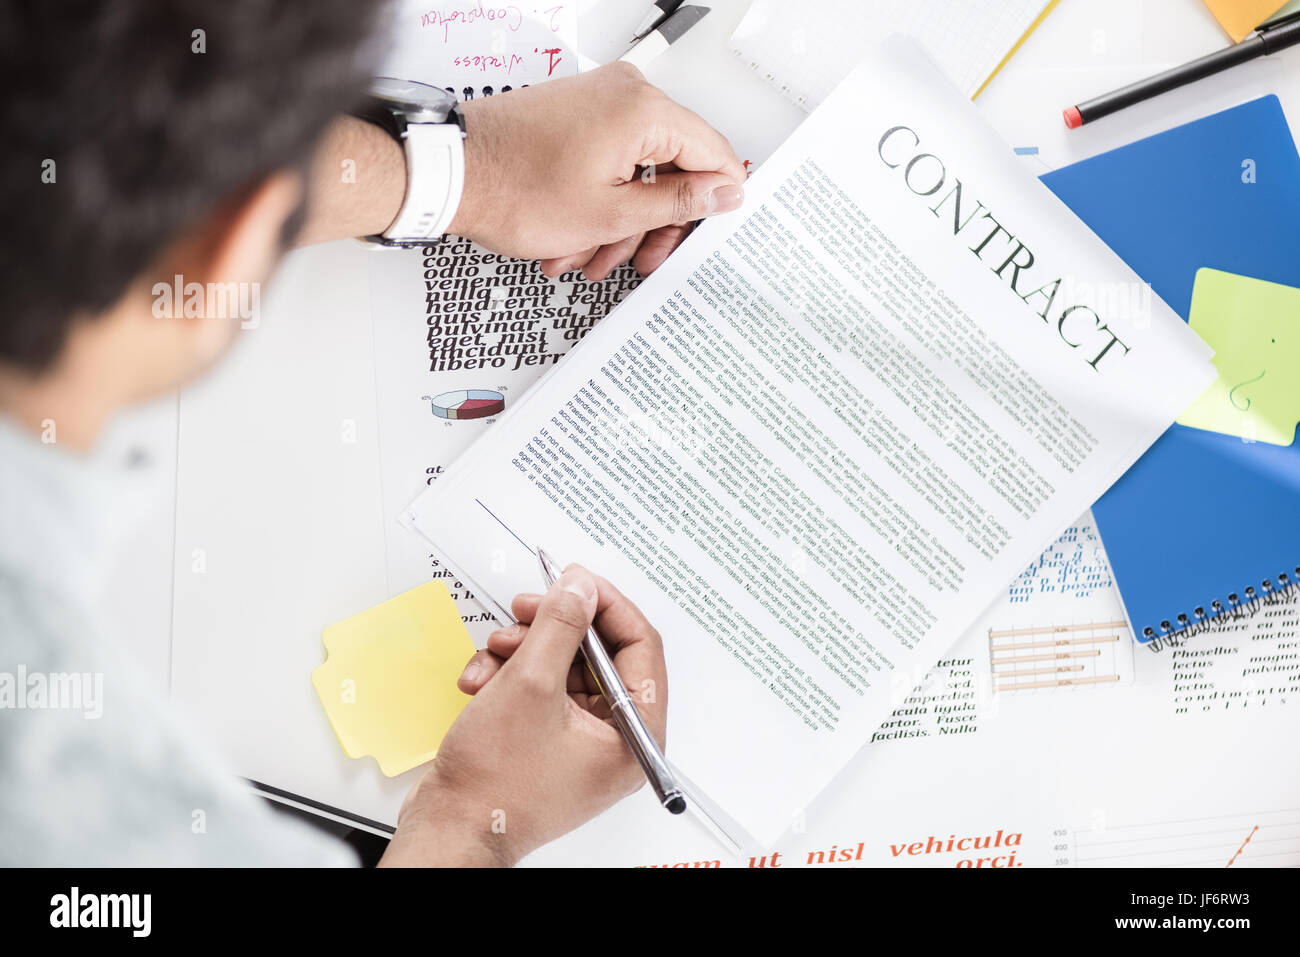 Overhead view of businessman holding contract above table with papers Stock Photo